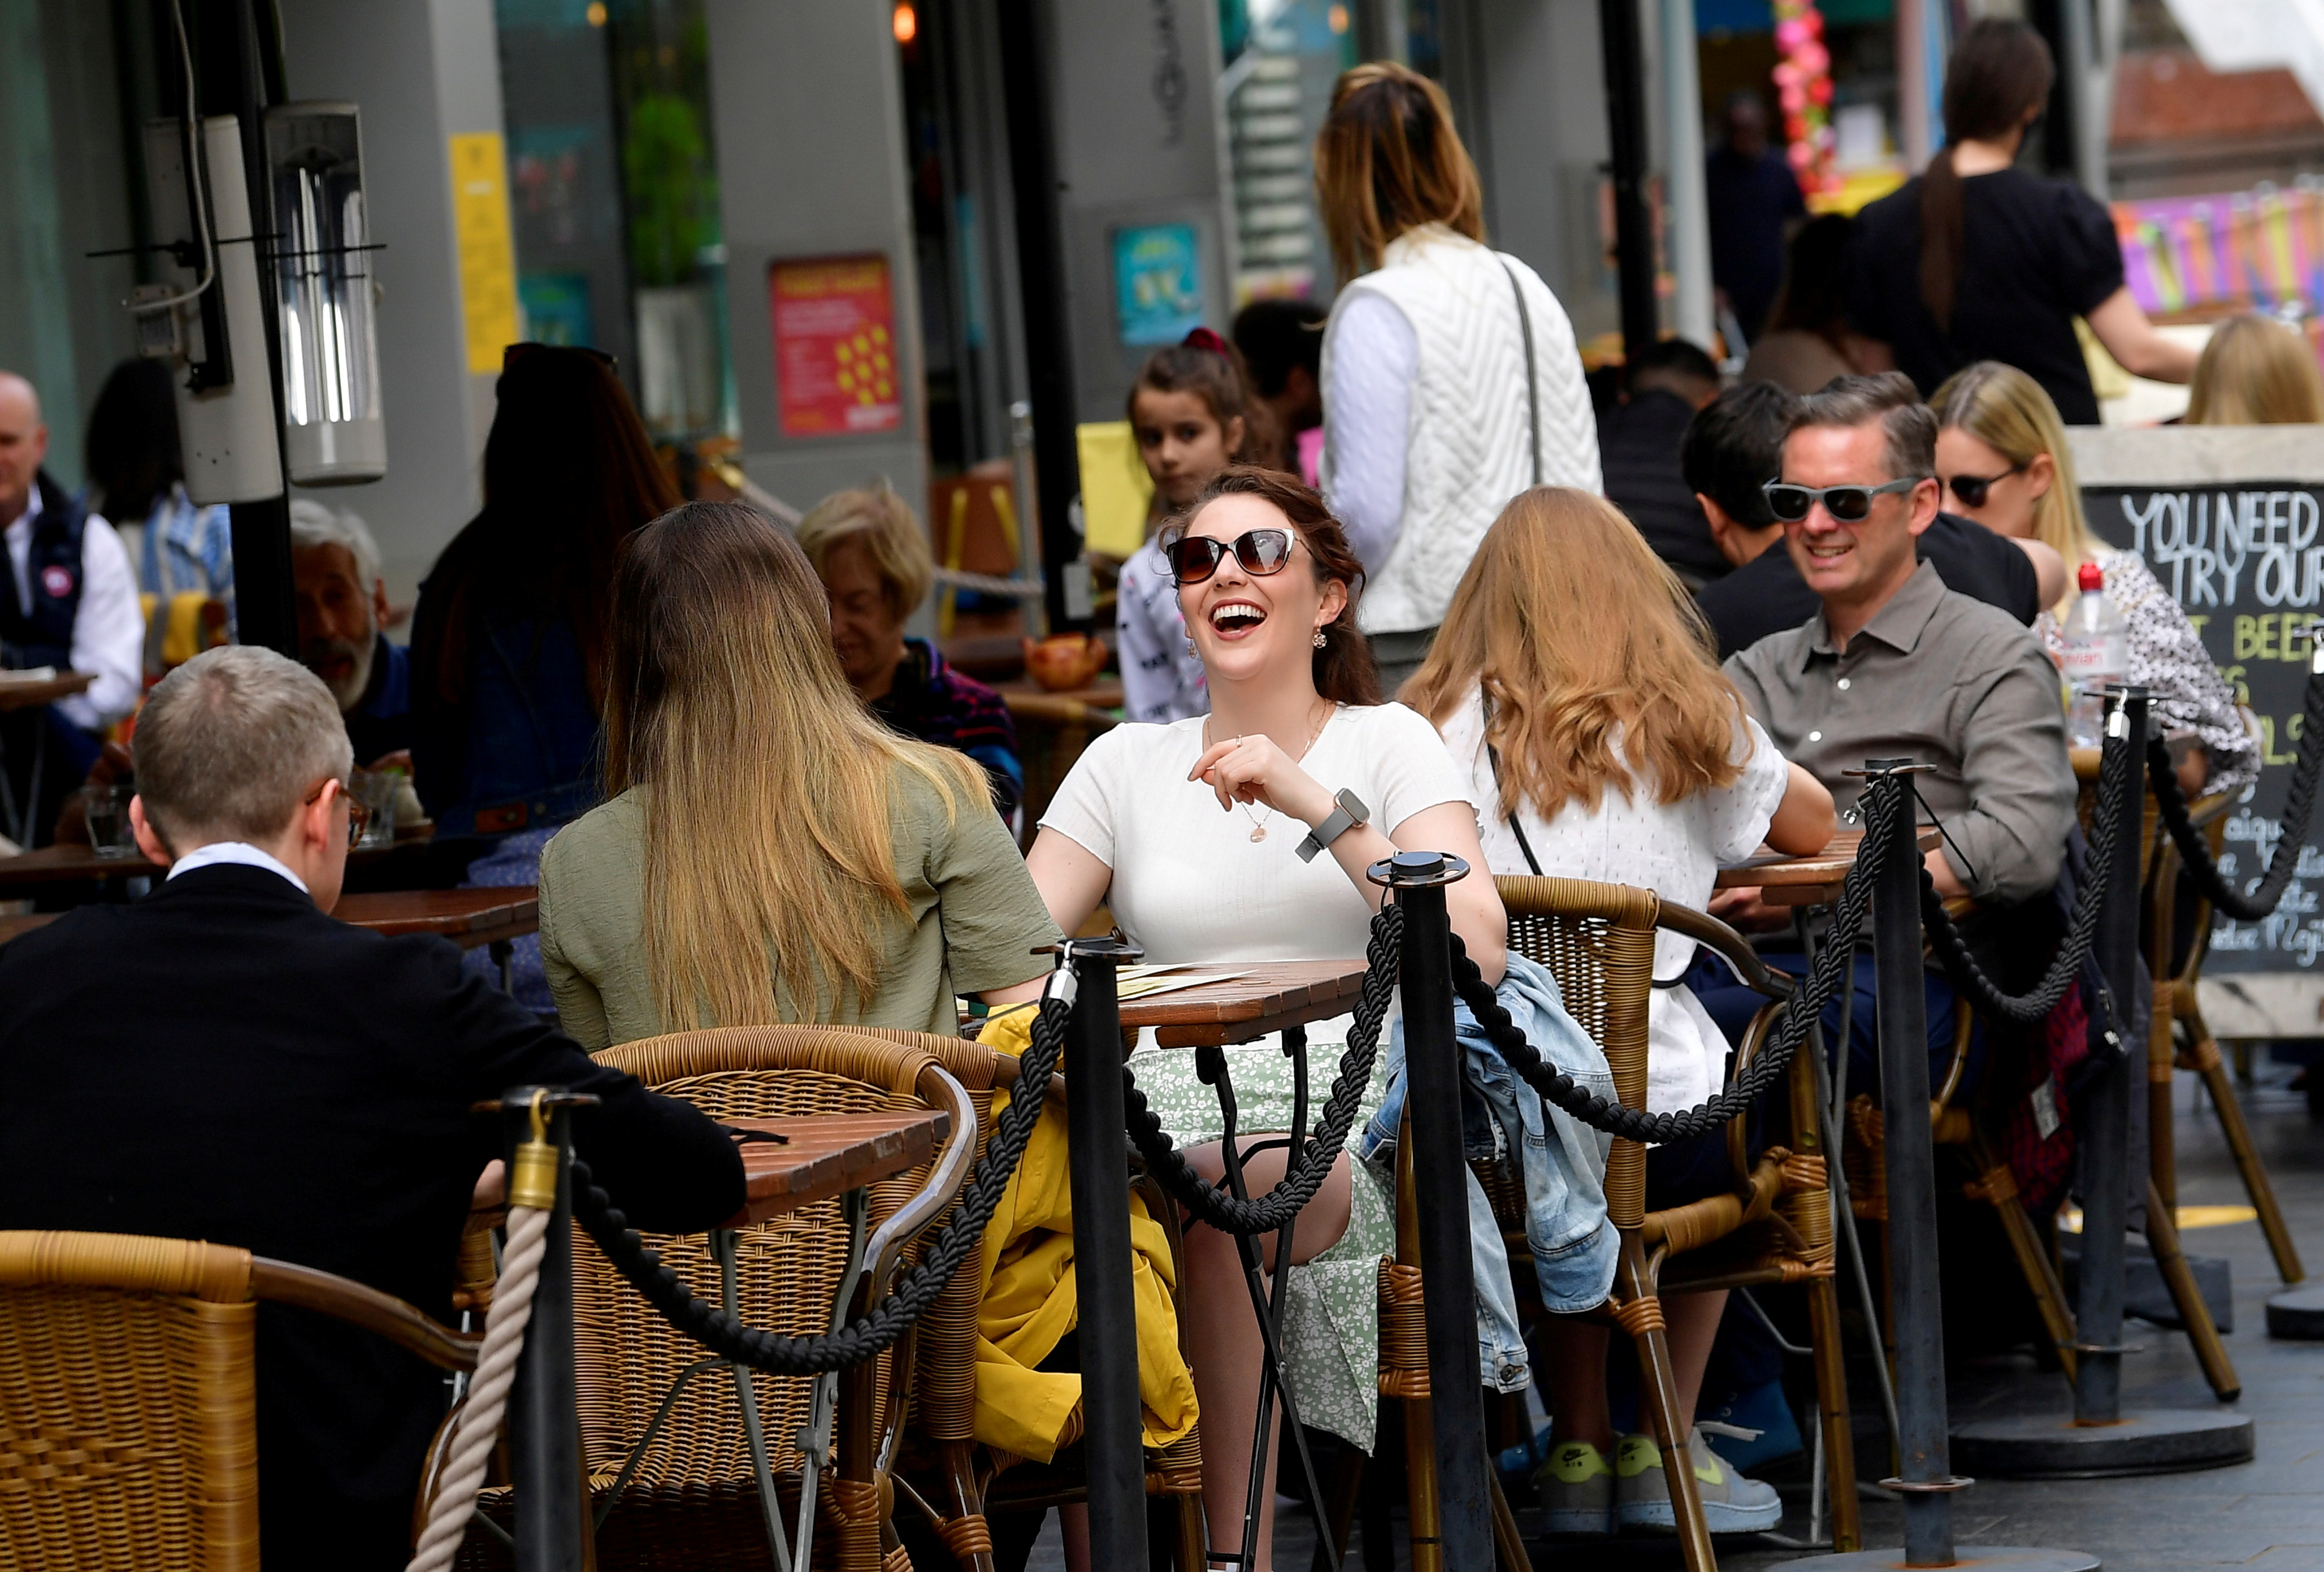 People relax at outdoor dining areas as lockdown restrictions continue to ease in London